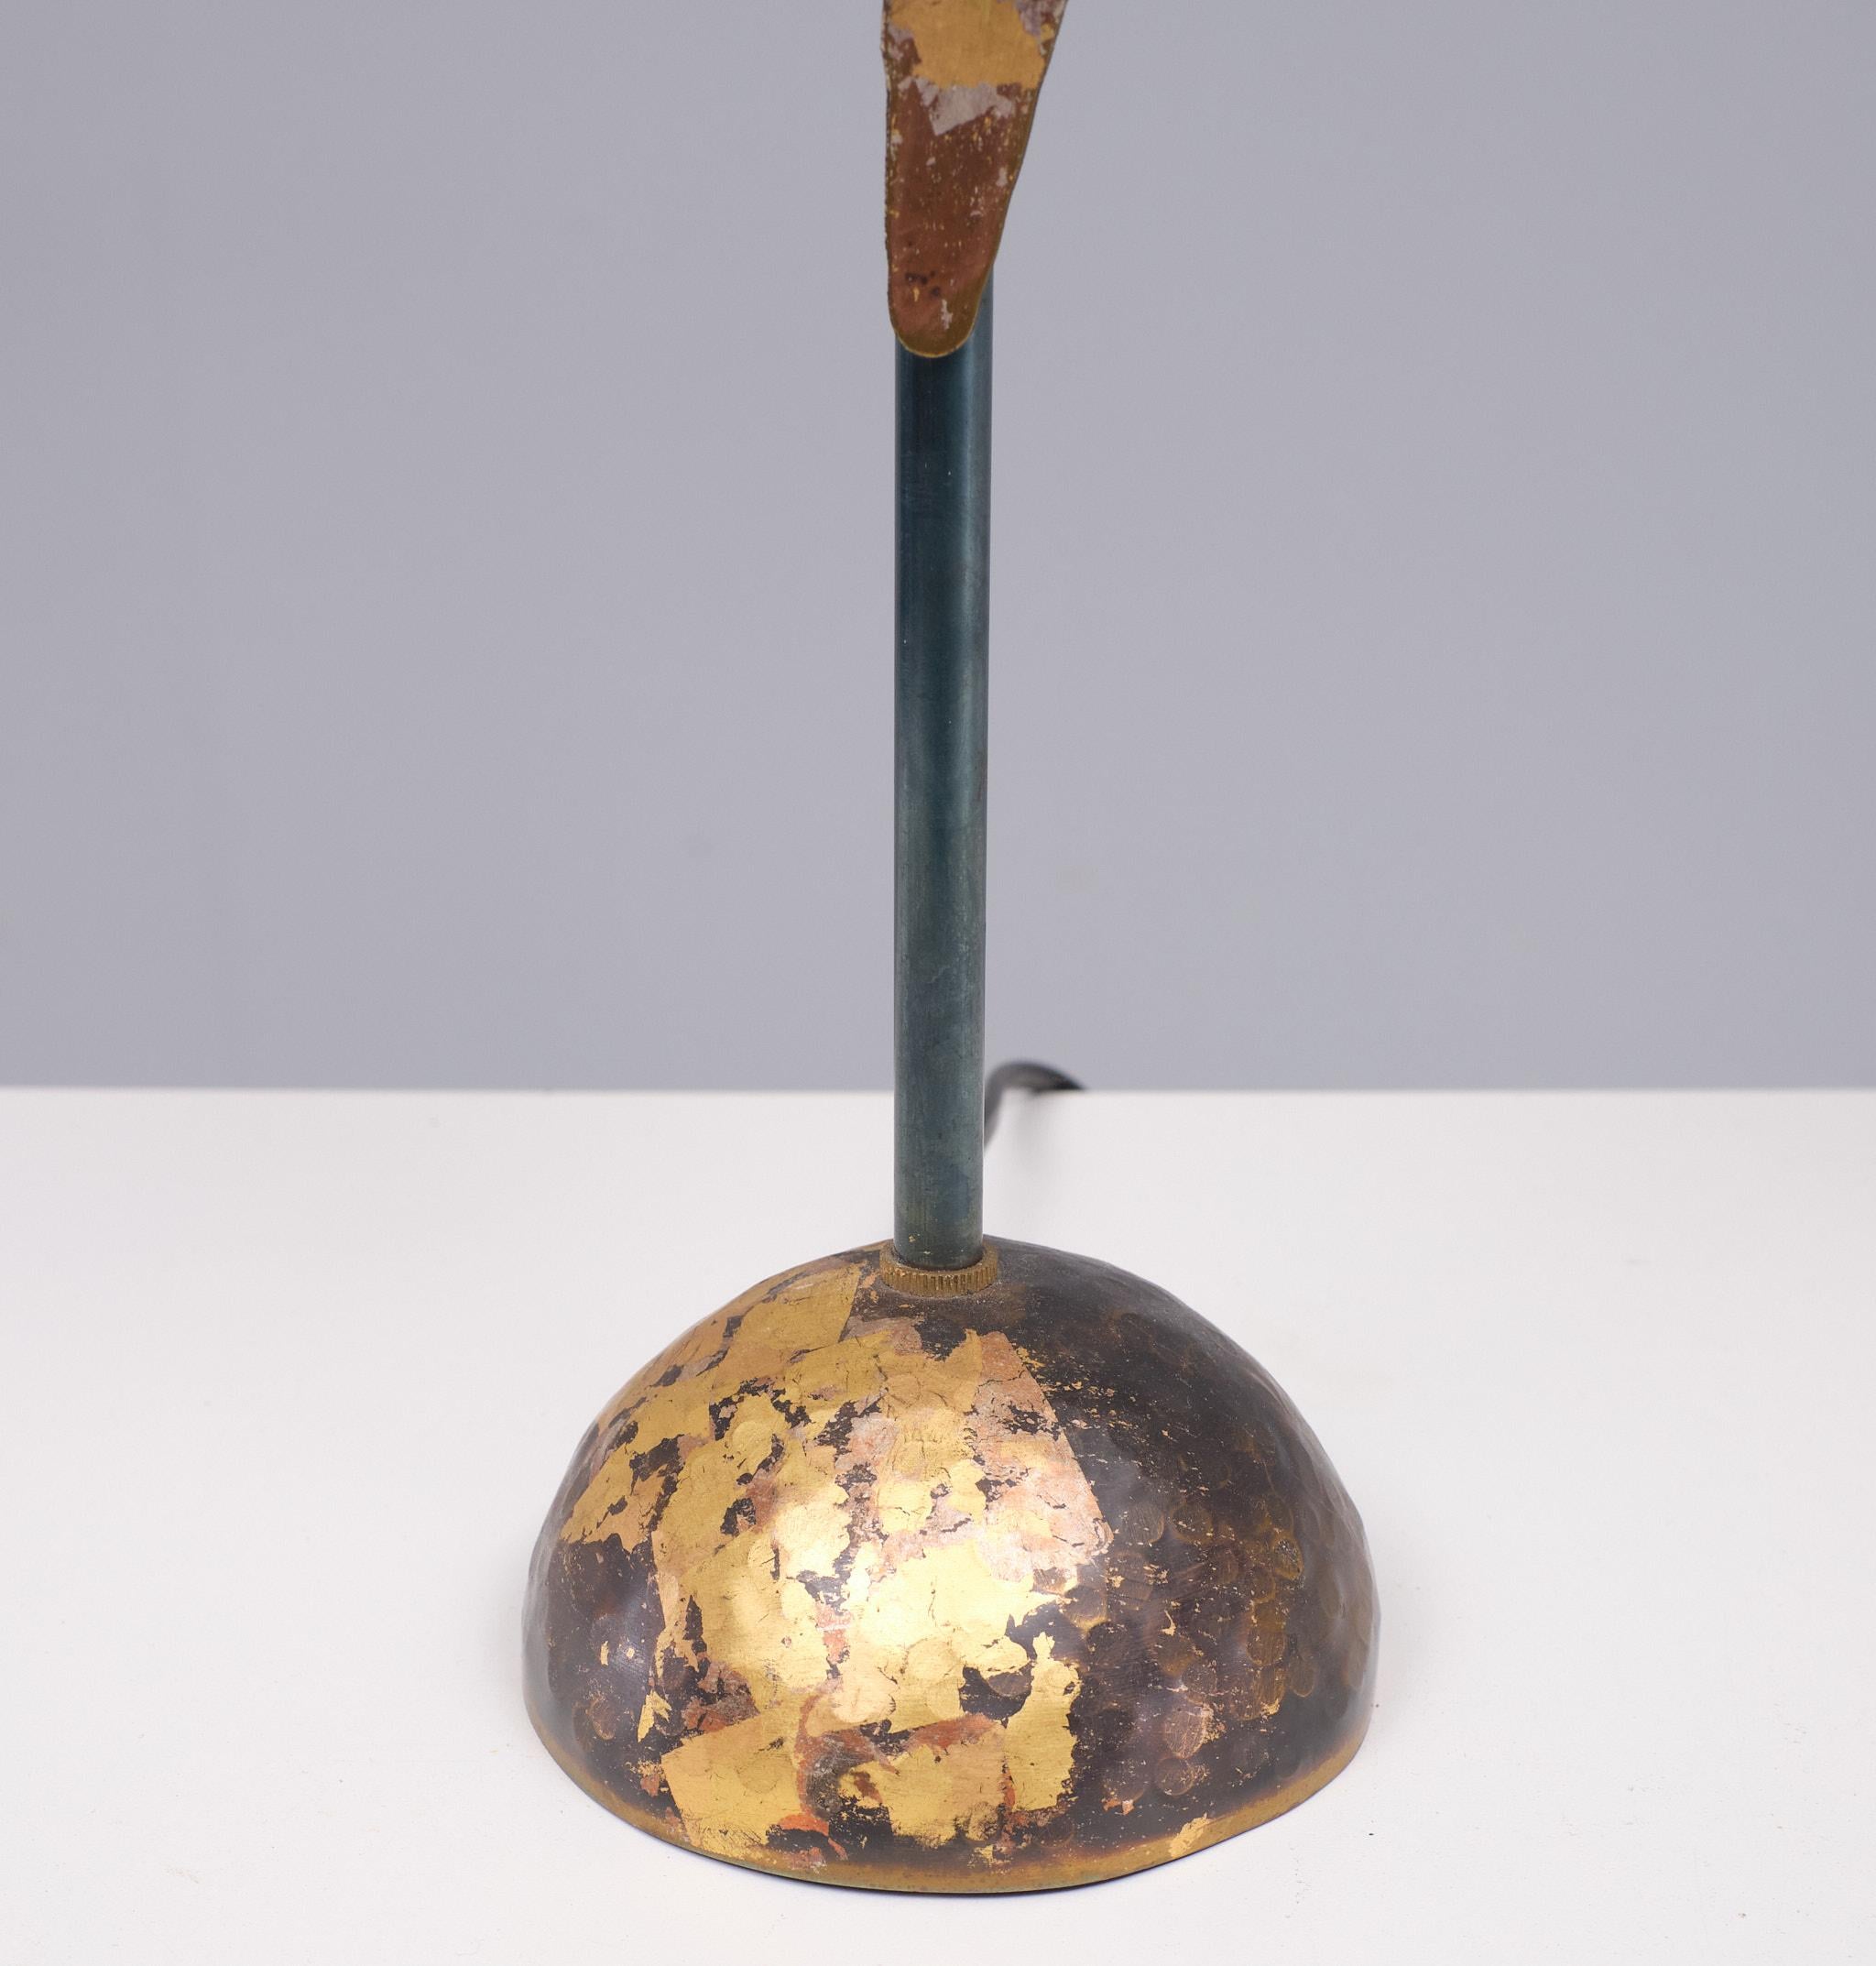 Very nice unique handmade Copper table lamp . by Robert Kostka France 1980s 
comes with its original wood chip shades .
Small E14 socket lamp needed . 